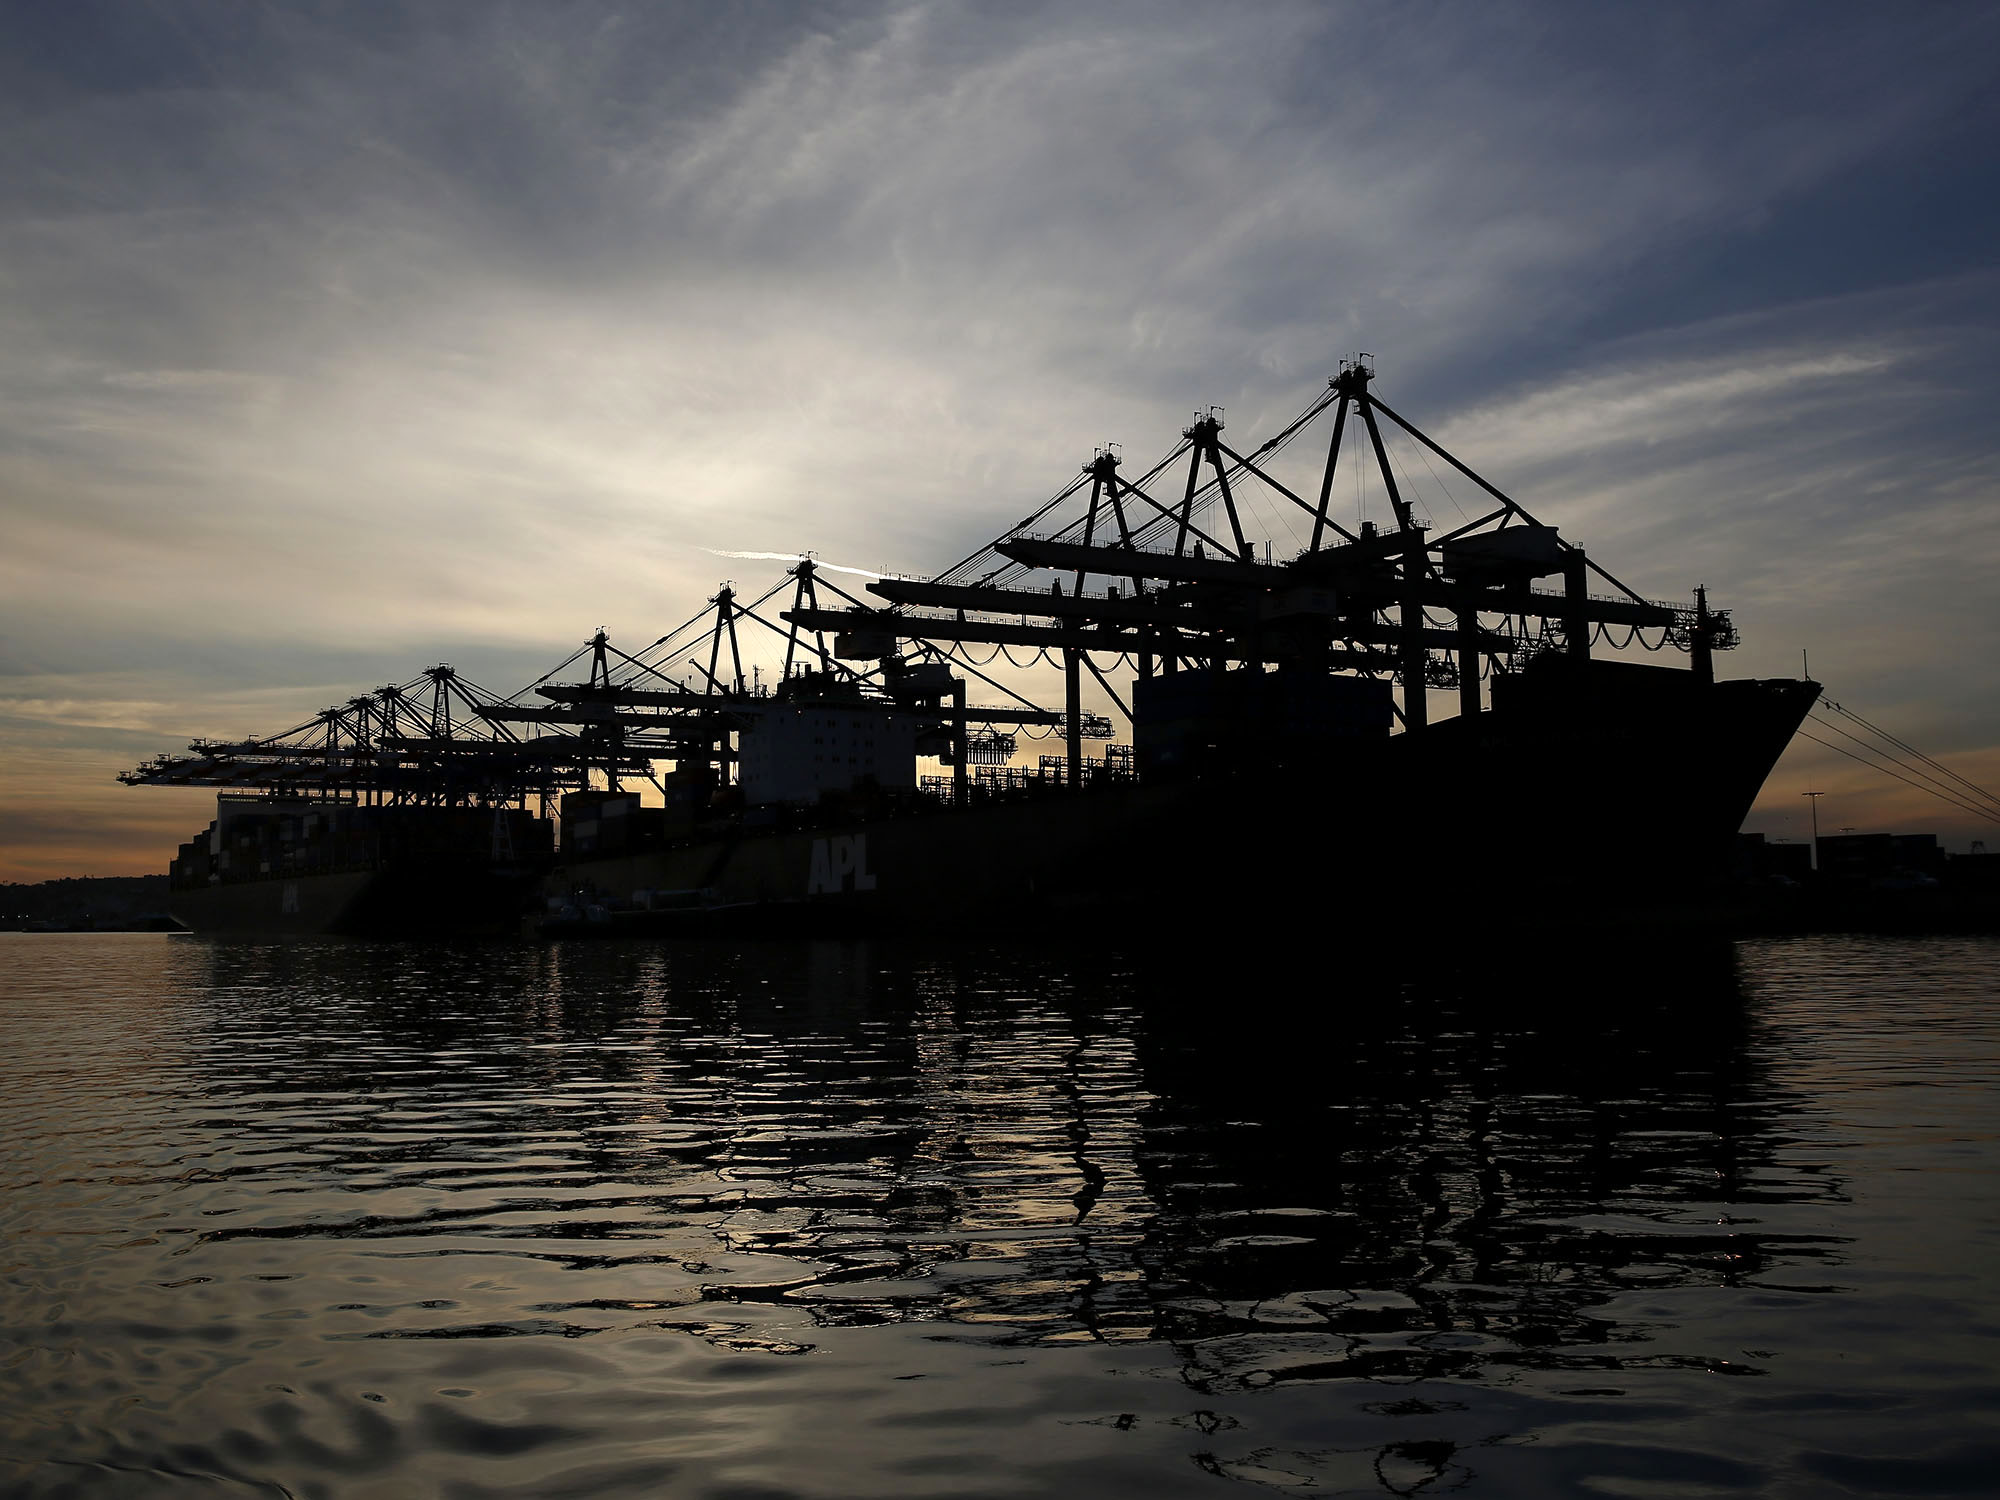 The silhouette of cranes are seen unloading container ships at the Port of Los Angeles in San Pedro, California.